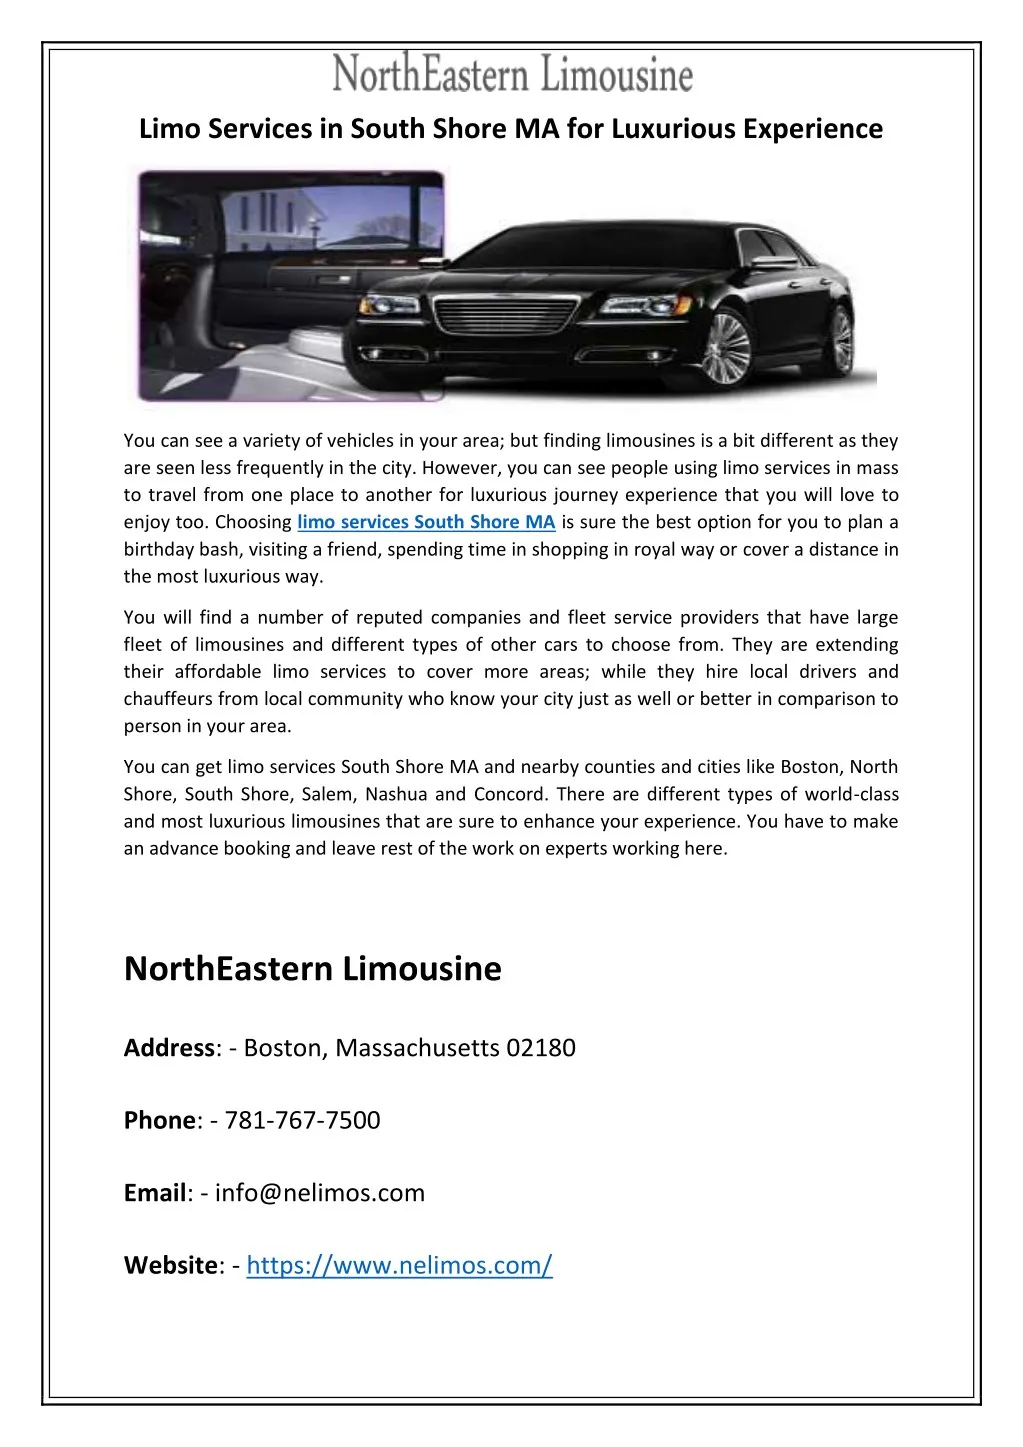 limo services in south shore ma for luxurious